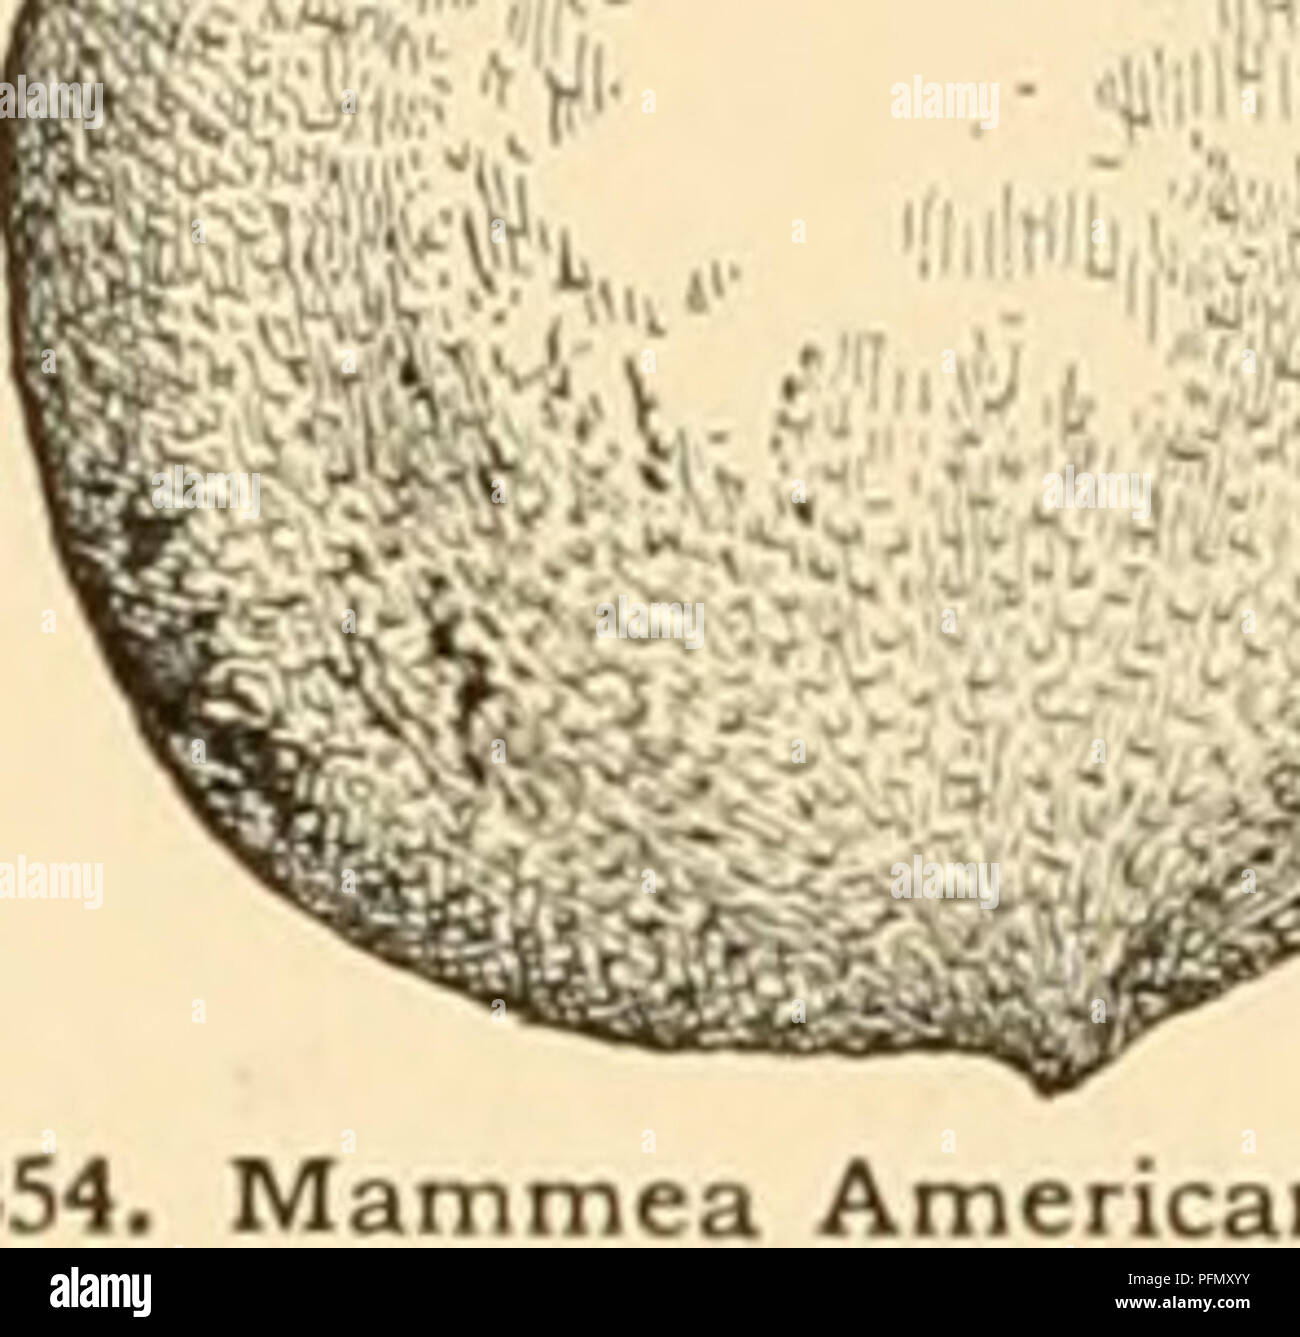 . Cyclopedia of American horticulture : comprising suggestions for cultivation of horticultural plants, descriptions of the species of fruits, vegetables, flowers, and ornamental plants sold in the United States and Canada, together with geographical and biographical sketches. Gardening; Horticulture; Horticulture; Horticulture. 972 MAMMILLARIA MAMMILLARIA COO. stems cespitose from the grooves of the tubercles, often densely so: groove without glands but often spinose for most of its length: radial spines fewer and weaker: cen- tral solitary or want- ,ng Bliissiiiiix purple or purplish: ^I'uux Stock Photo